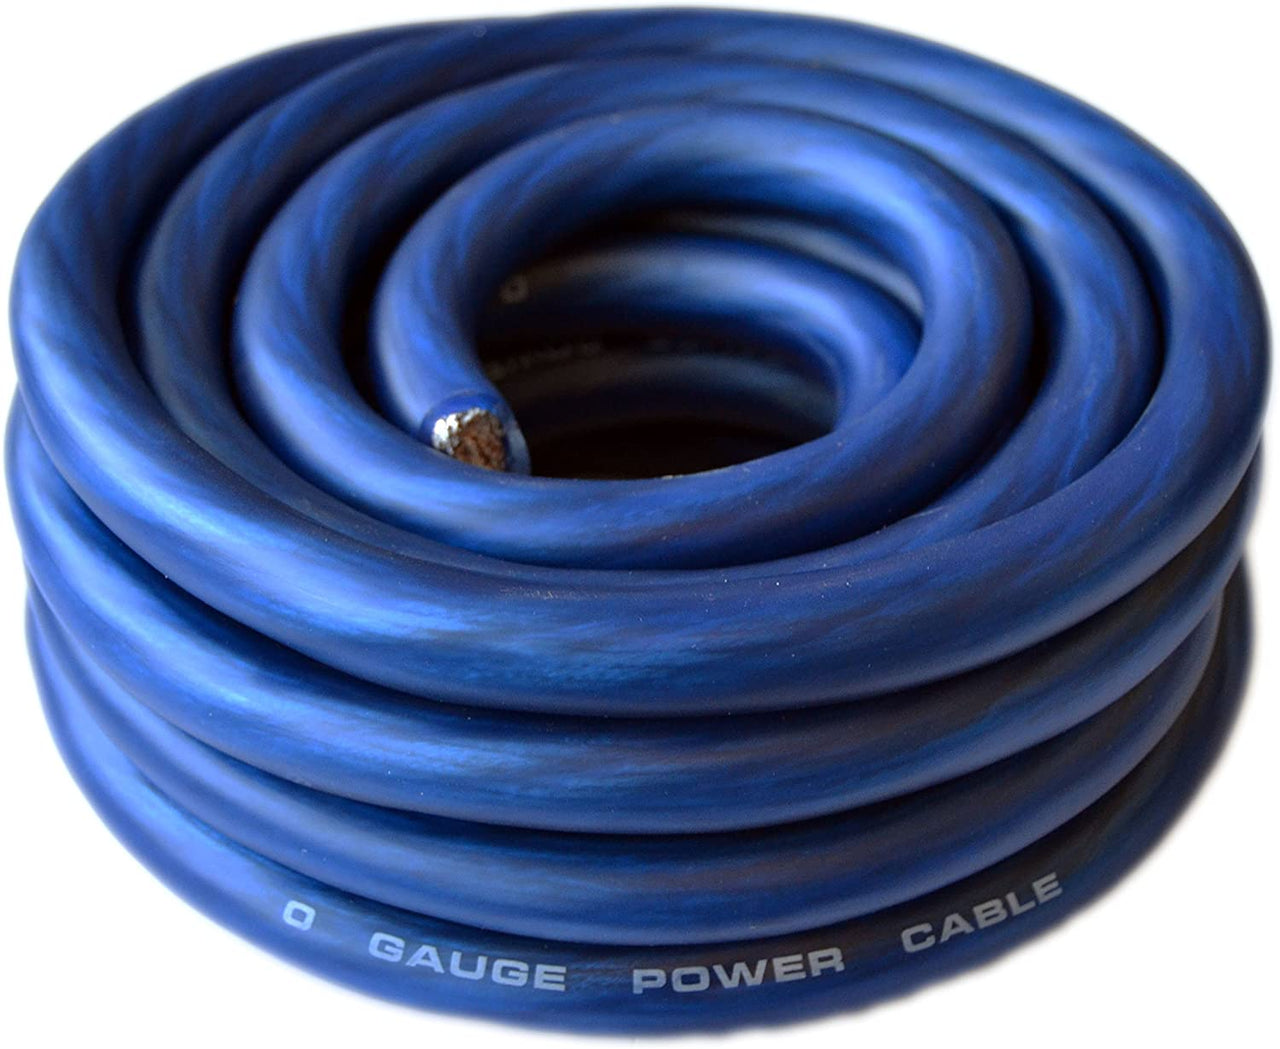 Absolute 1/0 Gauge Blue 25ft Power/Ground Wire True Spec and Soft Touch Cable